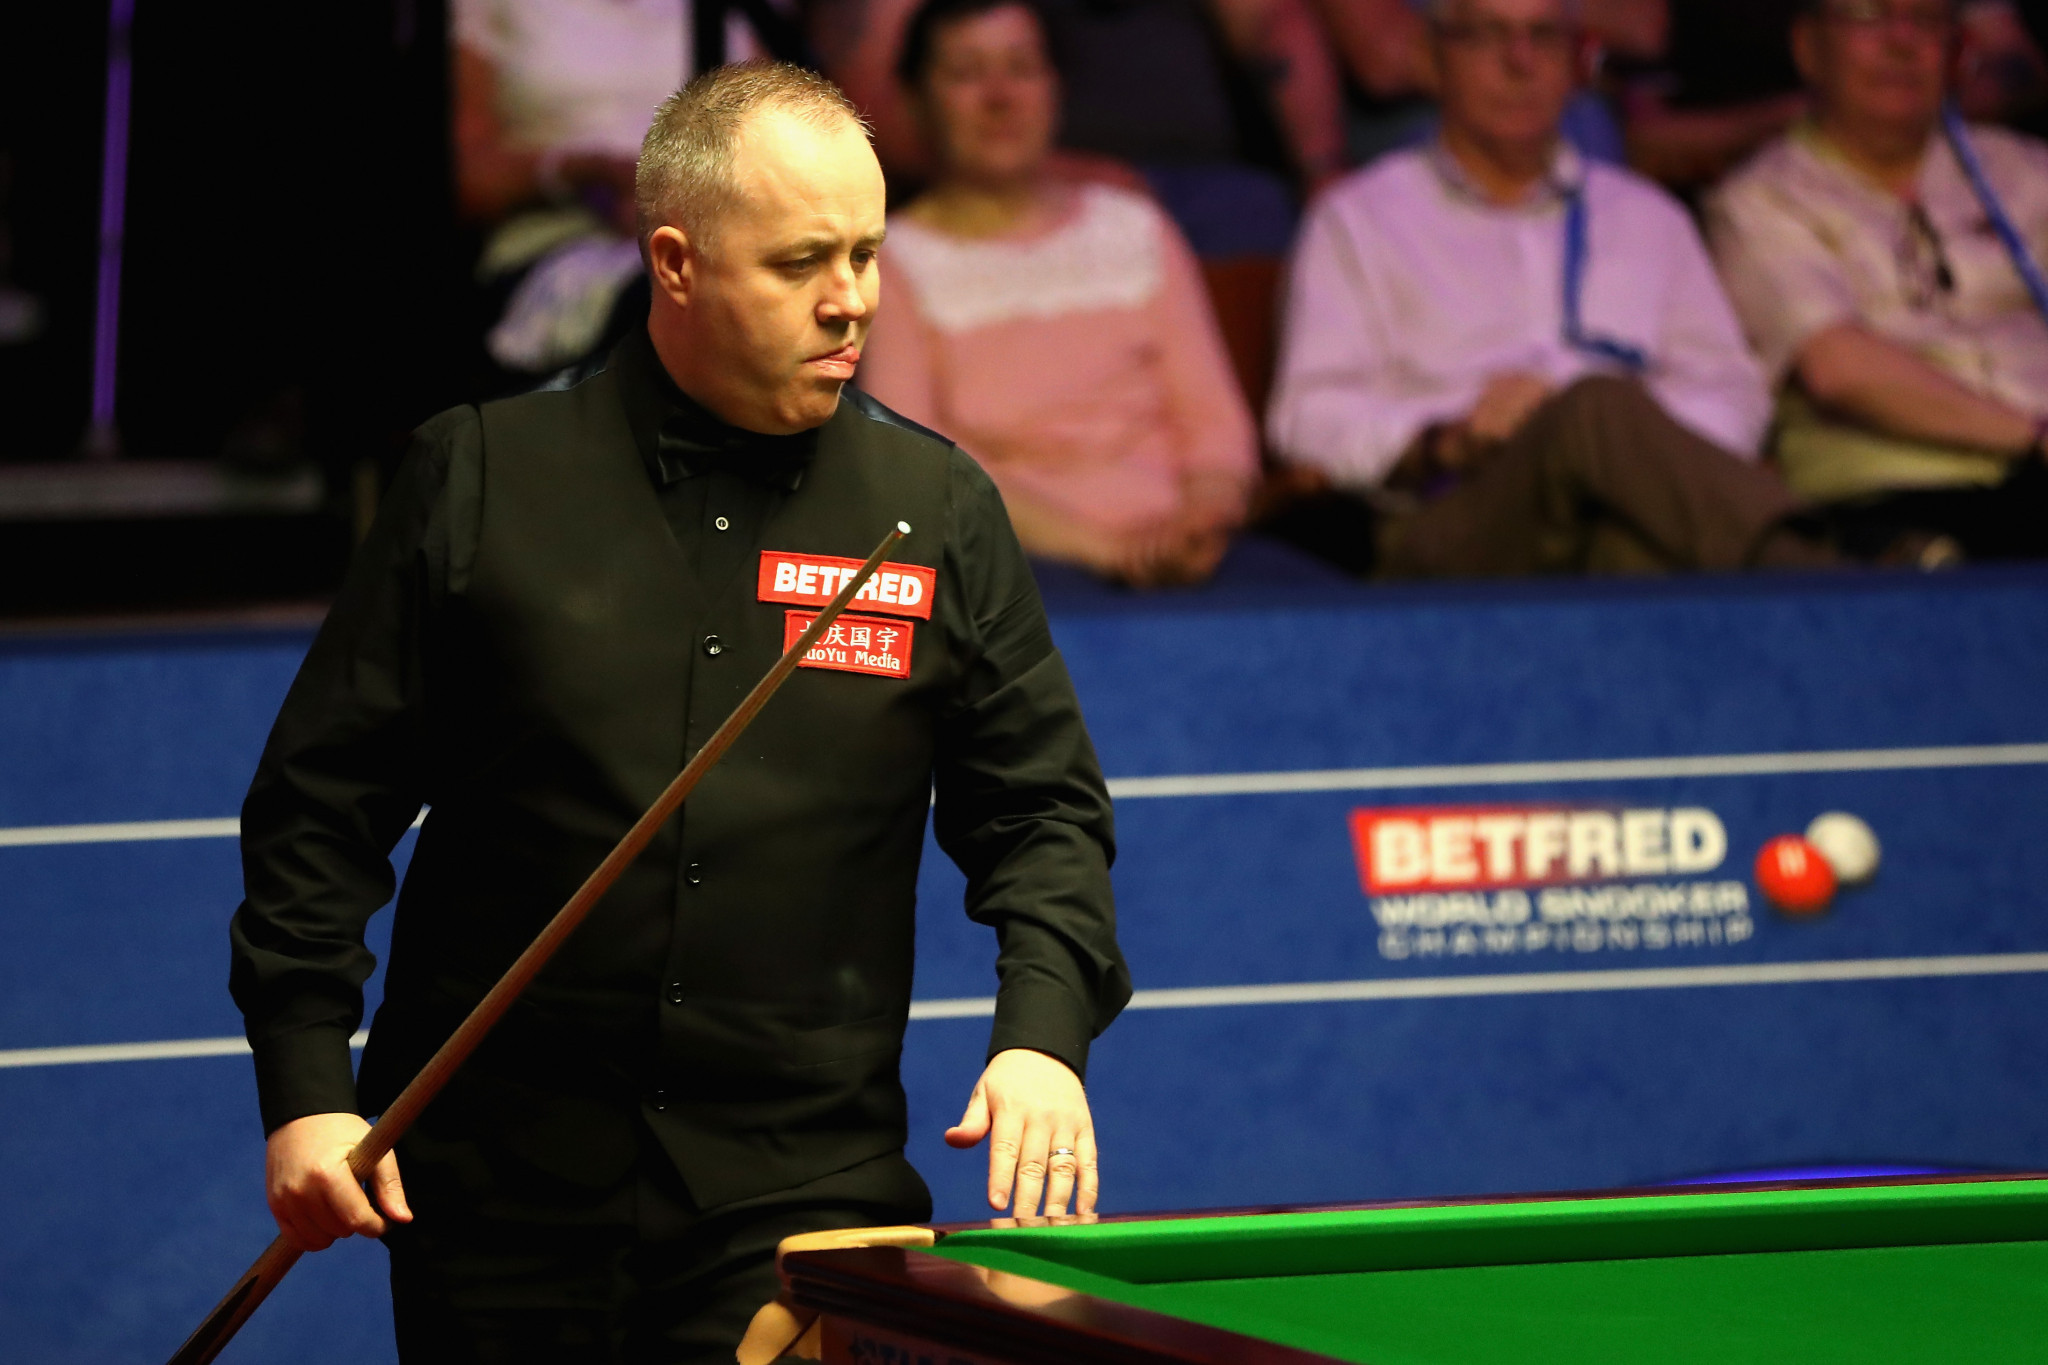 Higgins and Williams to meet in World Snooker Championship final